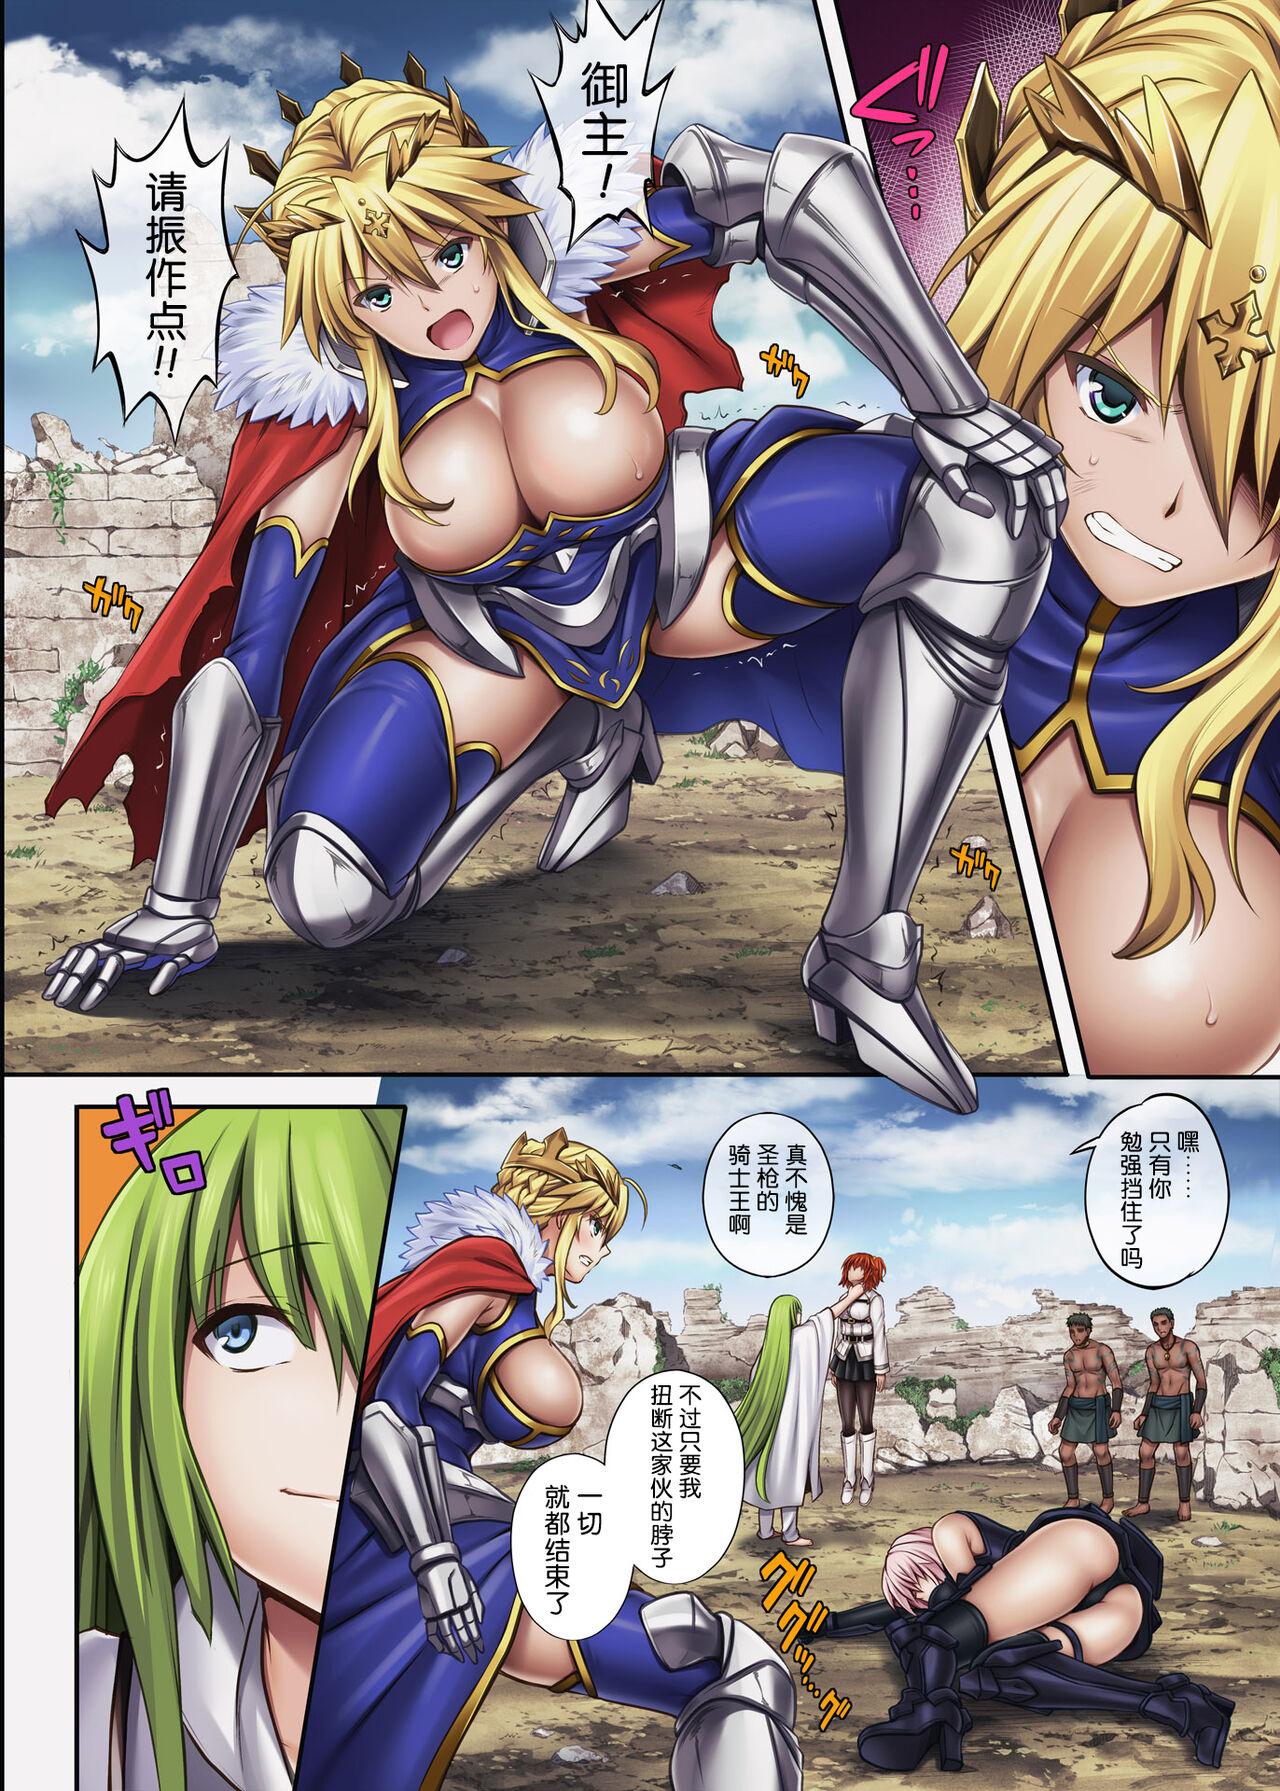 Boy Cyclone no Doujinshi Full Color Pack 4 - Fate grand order Hardcore Porn - Page 4